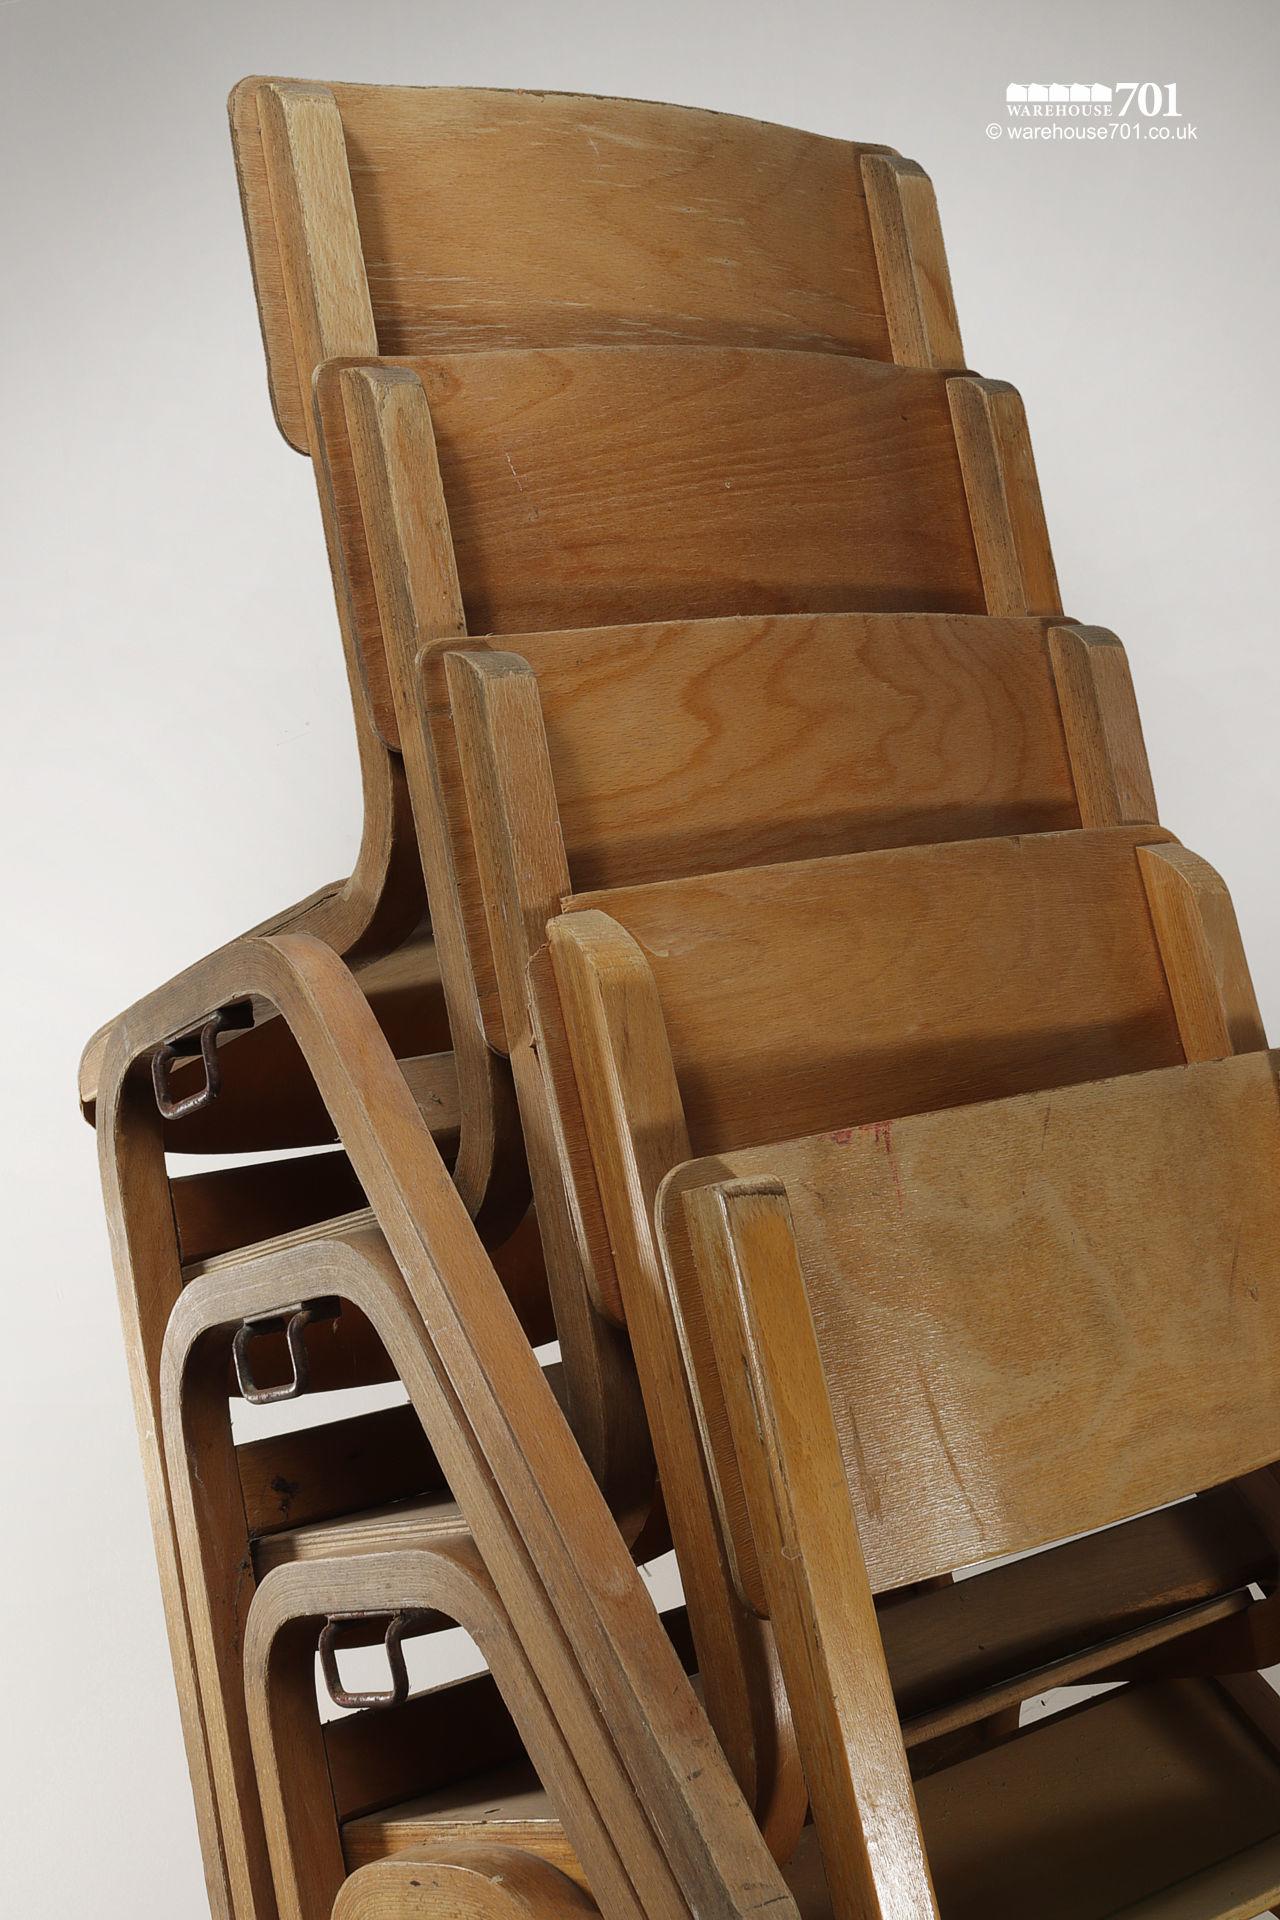 Used Vintage Shaped Wood and Ply Stacking Chairs #4